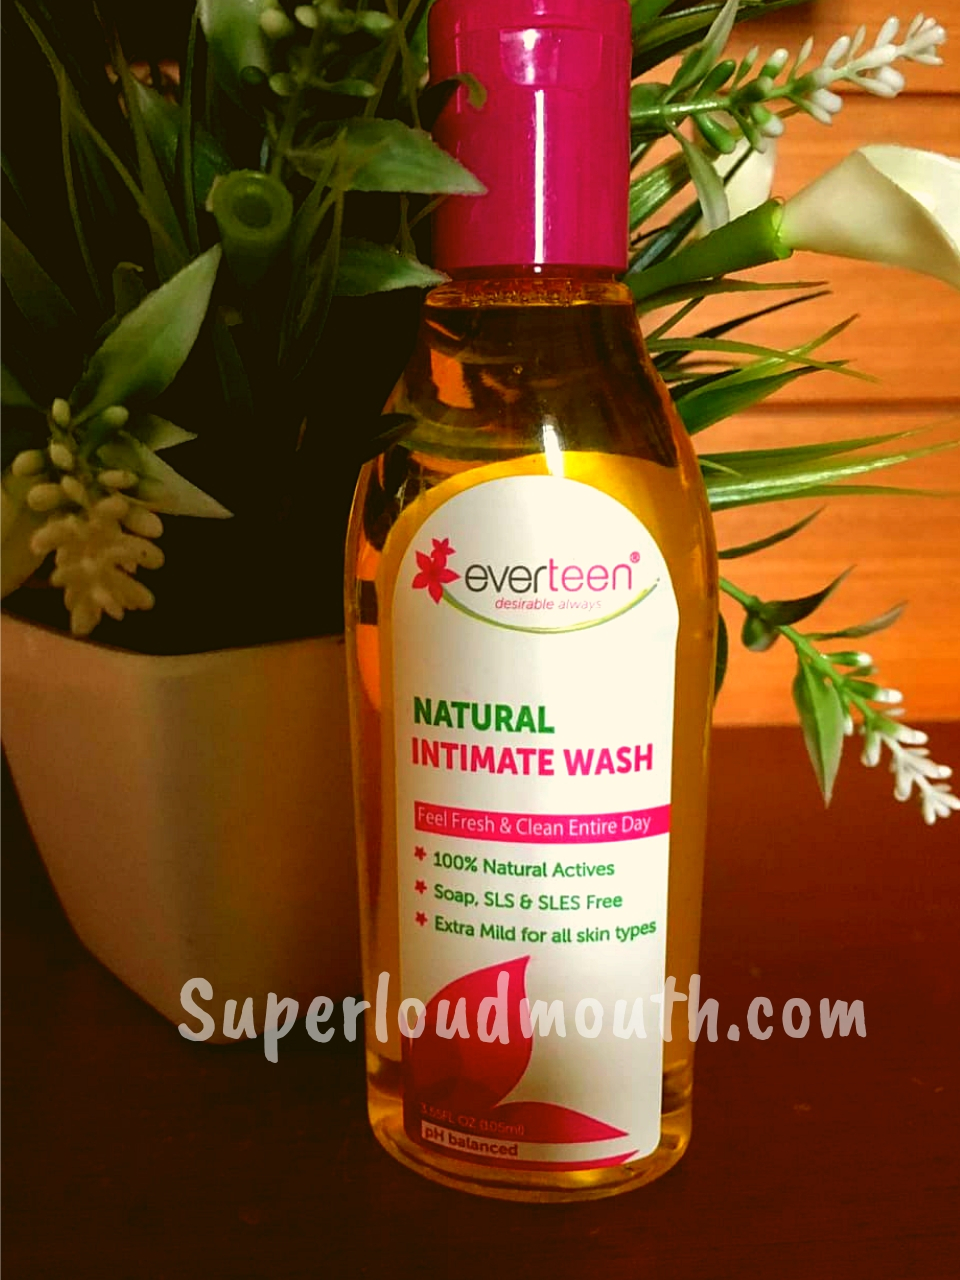 everteen's Natural intimate wash